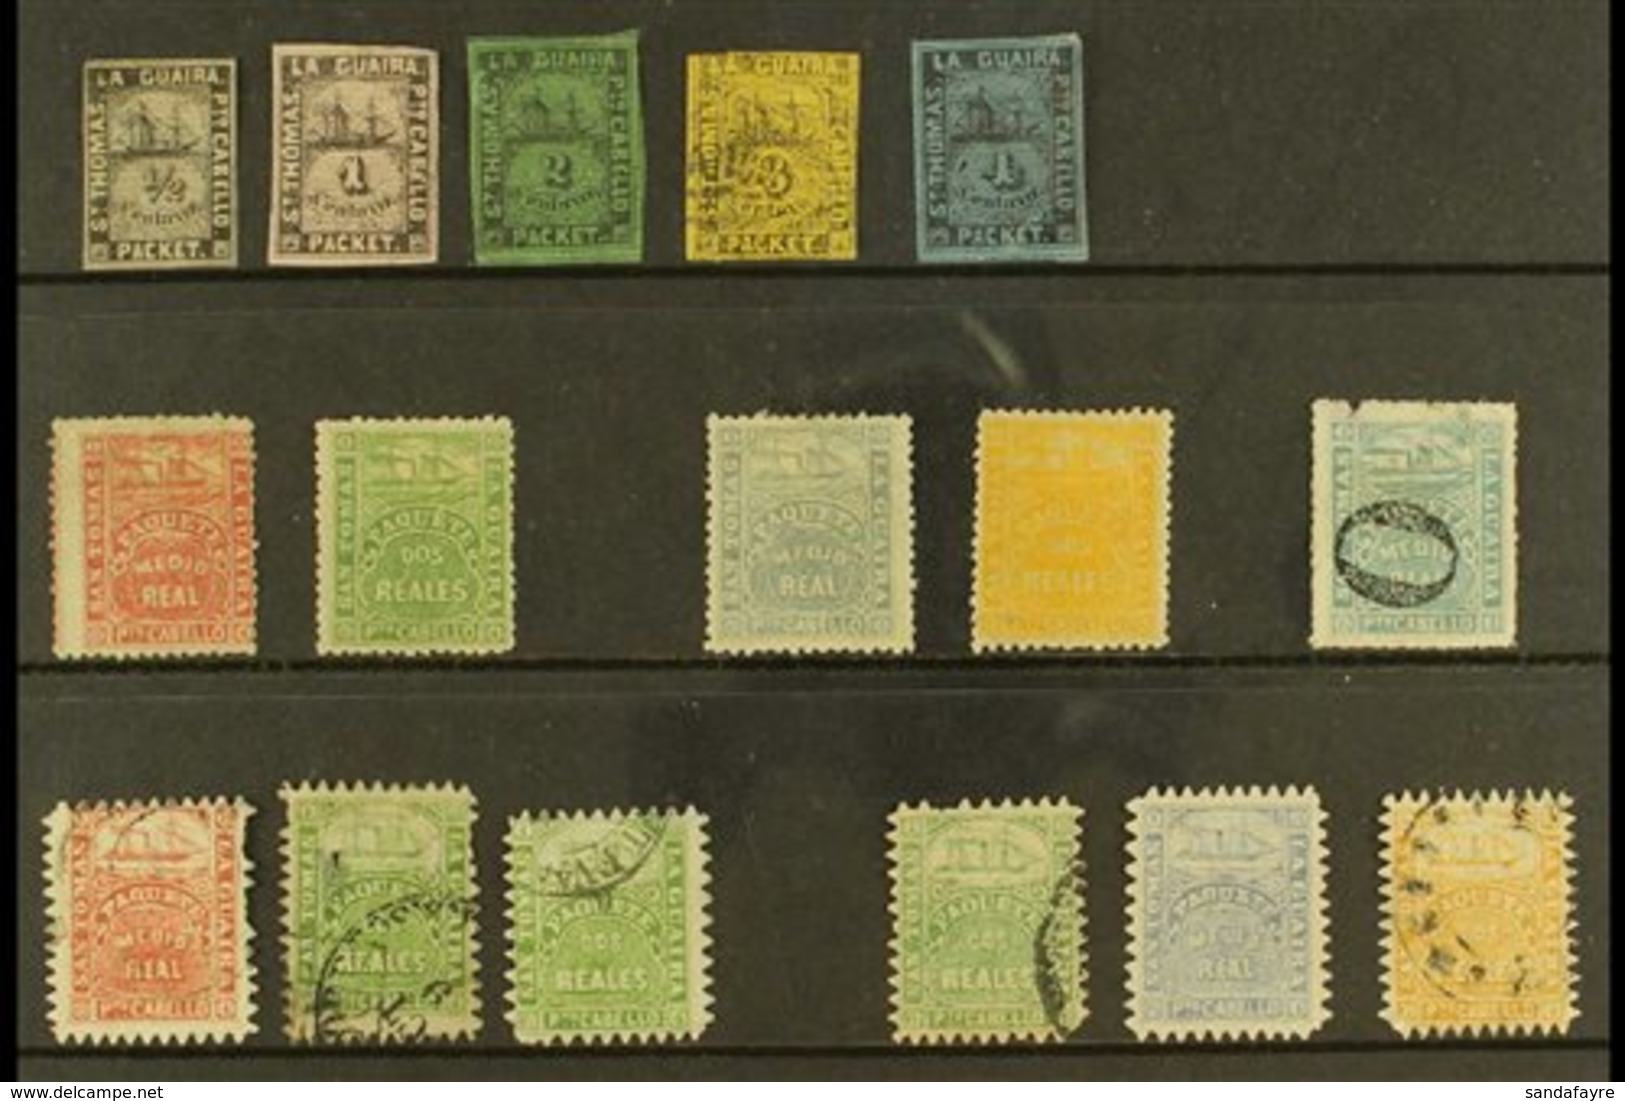 LA GUIARA LOCALS  1864-70 UNUSED & USED COLLECTION. Includes 1864-69 Imperf Set Of All Values, The ½c & 1c With Lines Ac - Venezuela